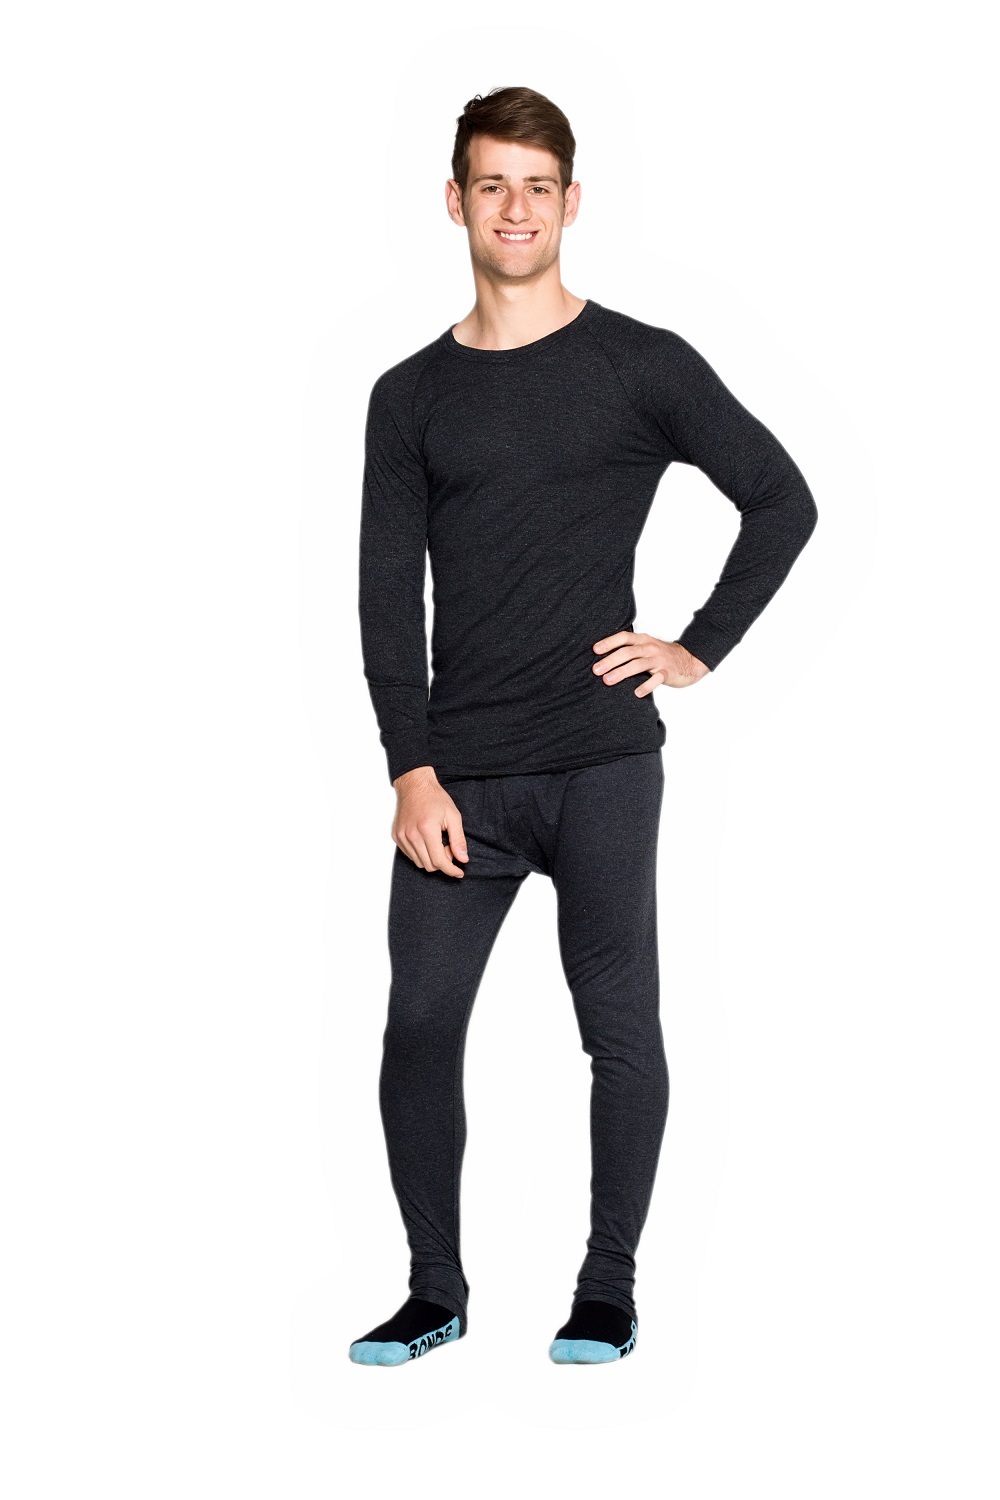 Isolate Wrong coupon merino mens thermals Desperate listener Permeability